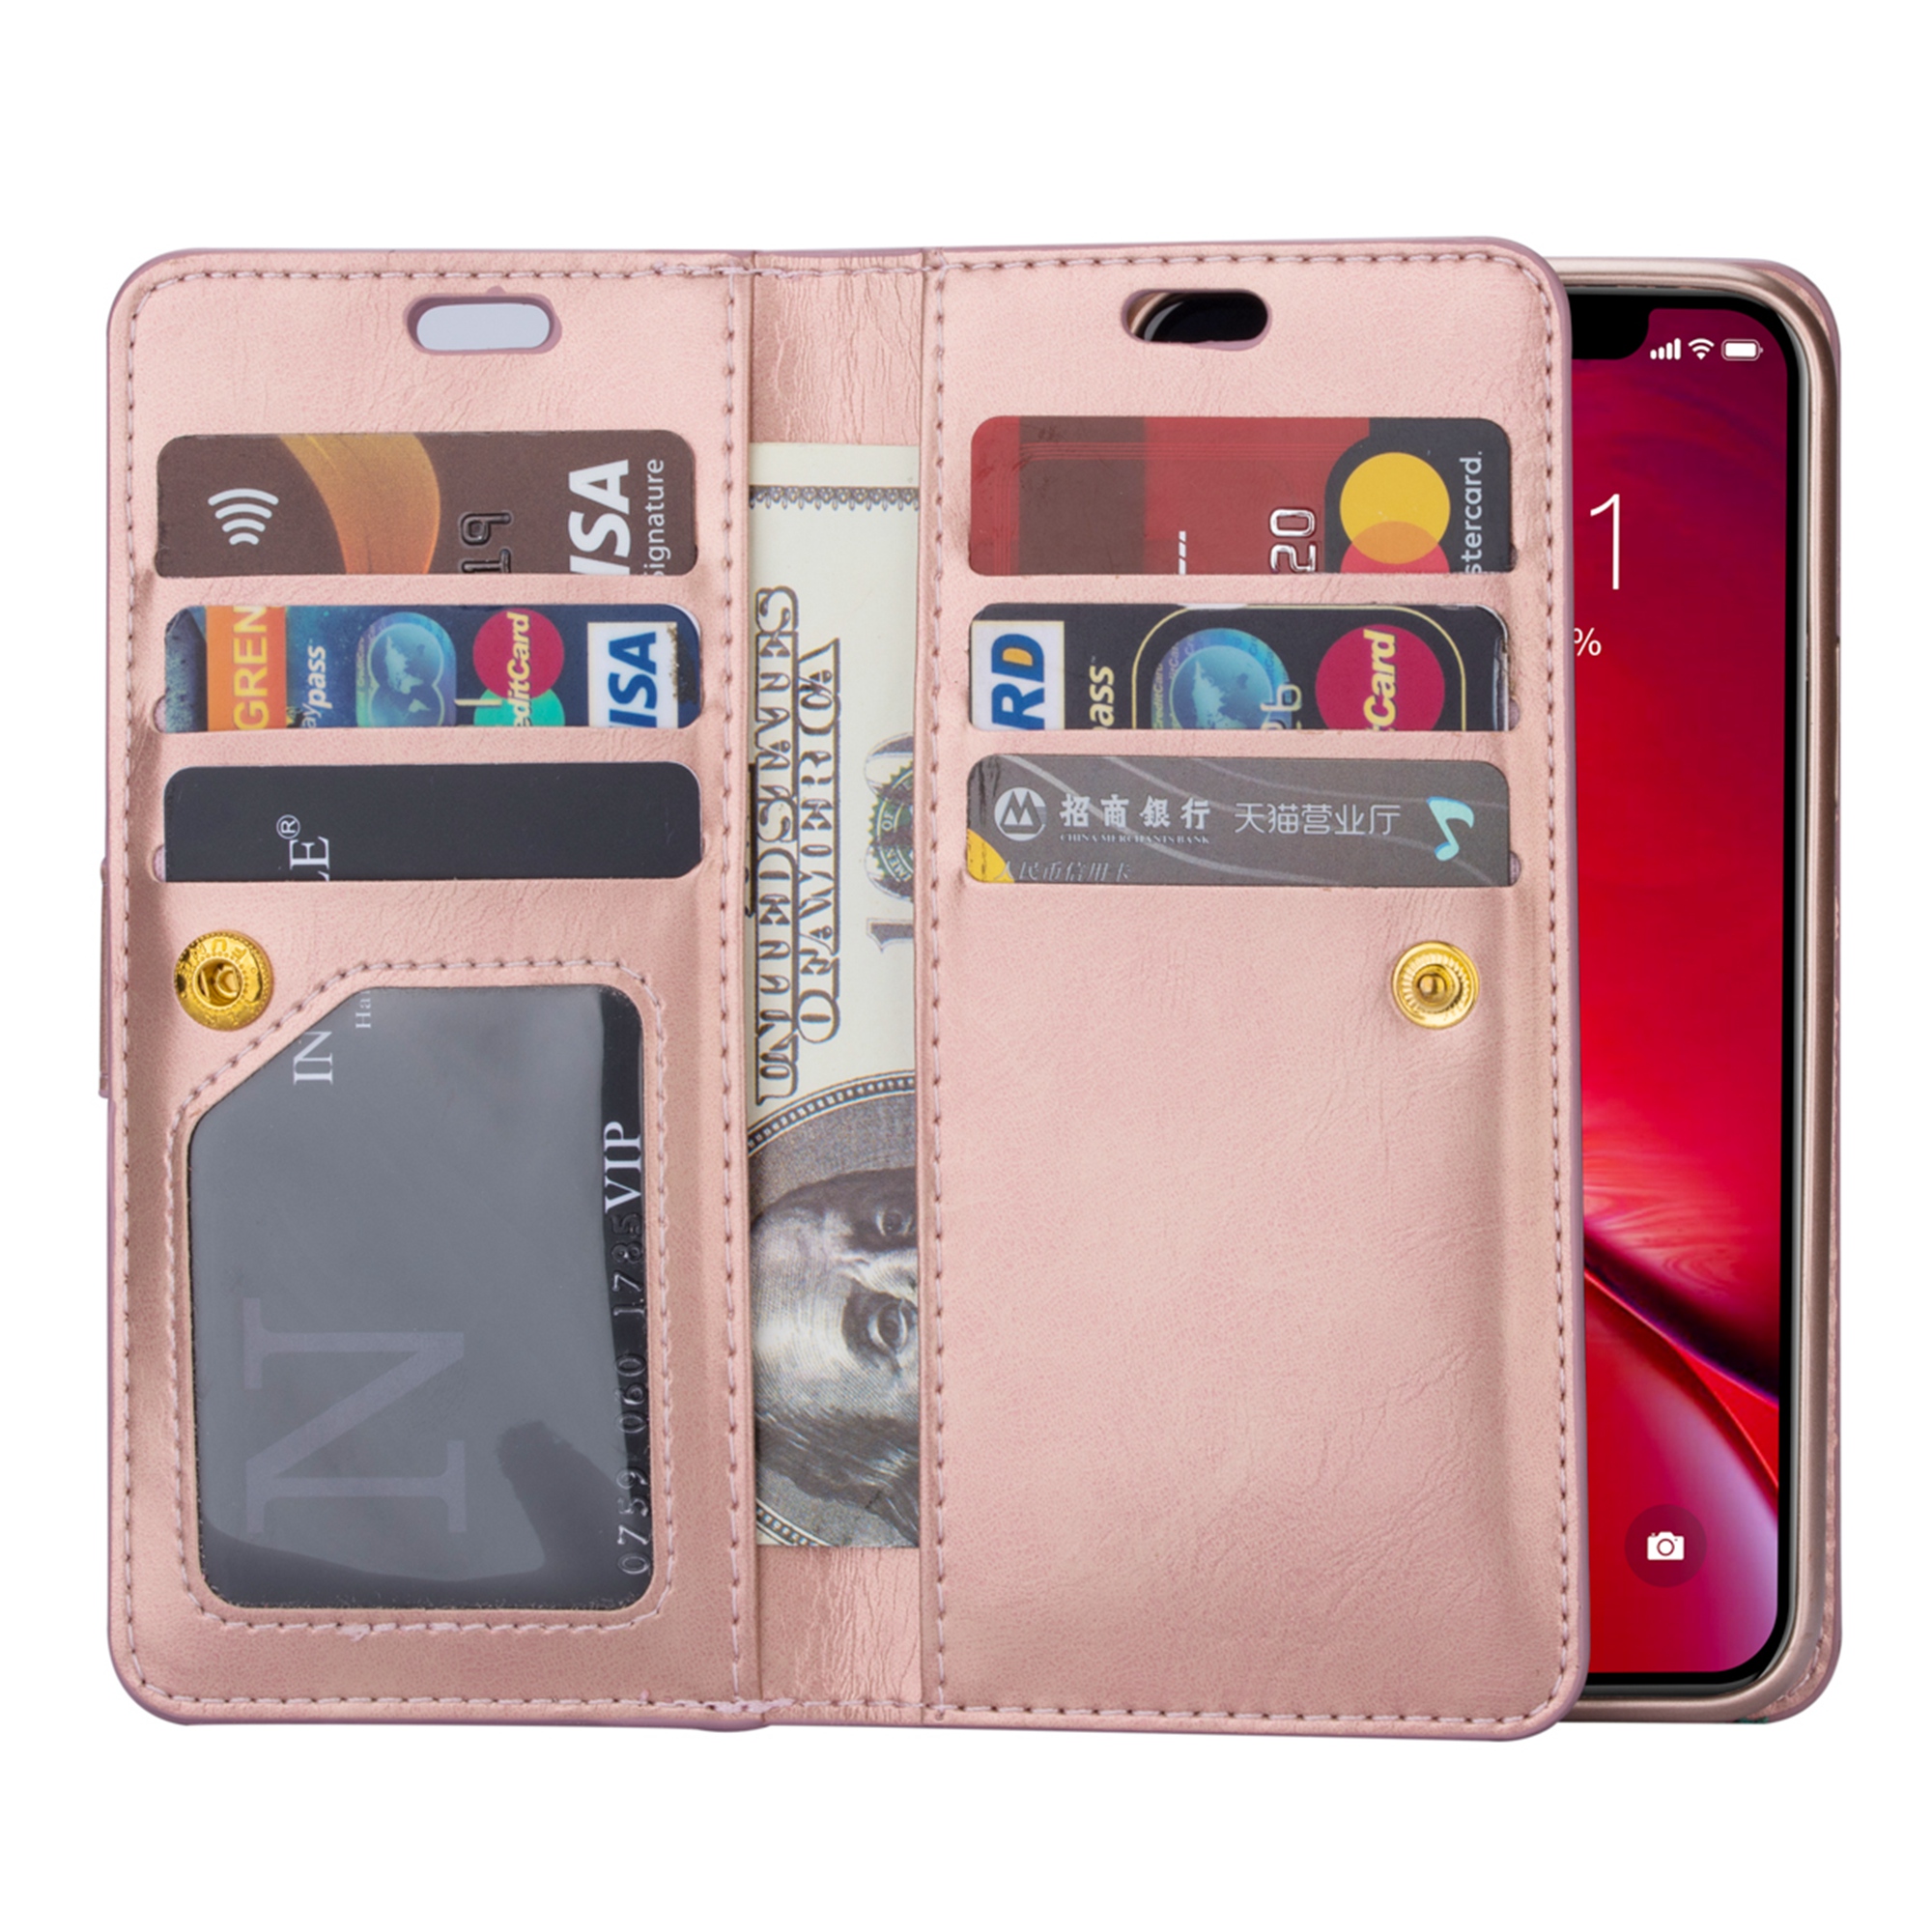 iPhone 11 6.1 inch Wallet Case, Dteck 9 Card Slots Premium Leather Zipper Purse case Flip Kickstand Folio Magnetic with Wrist Strap Credit Cash Cover For Apple iPhone 11, Rosegold - image 4 of 7